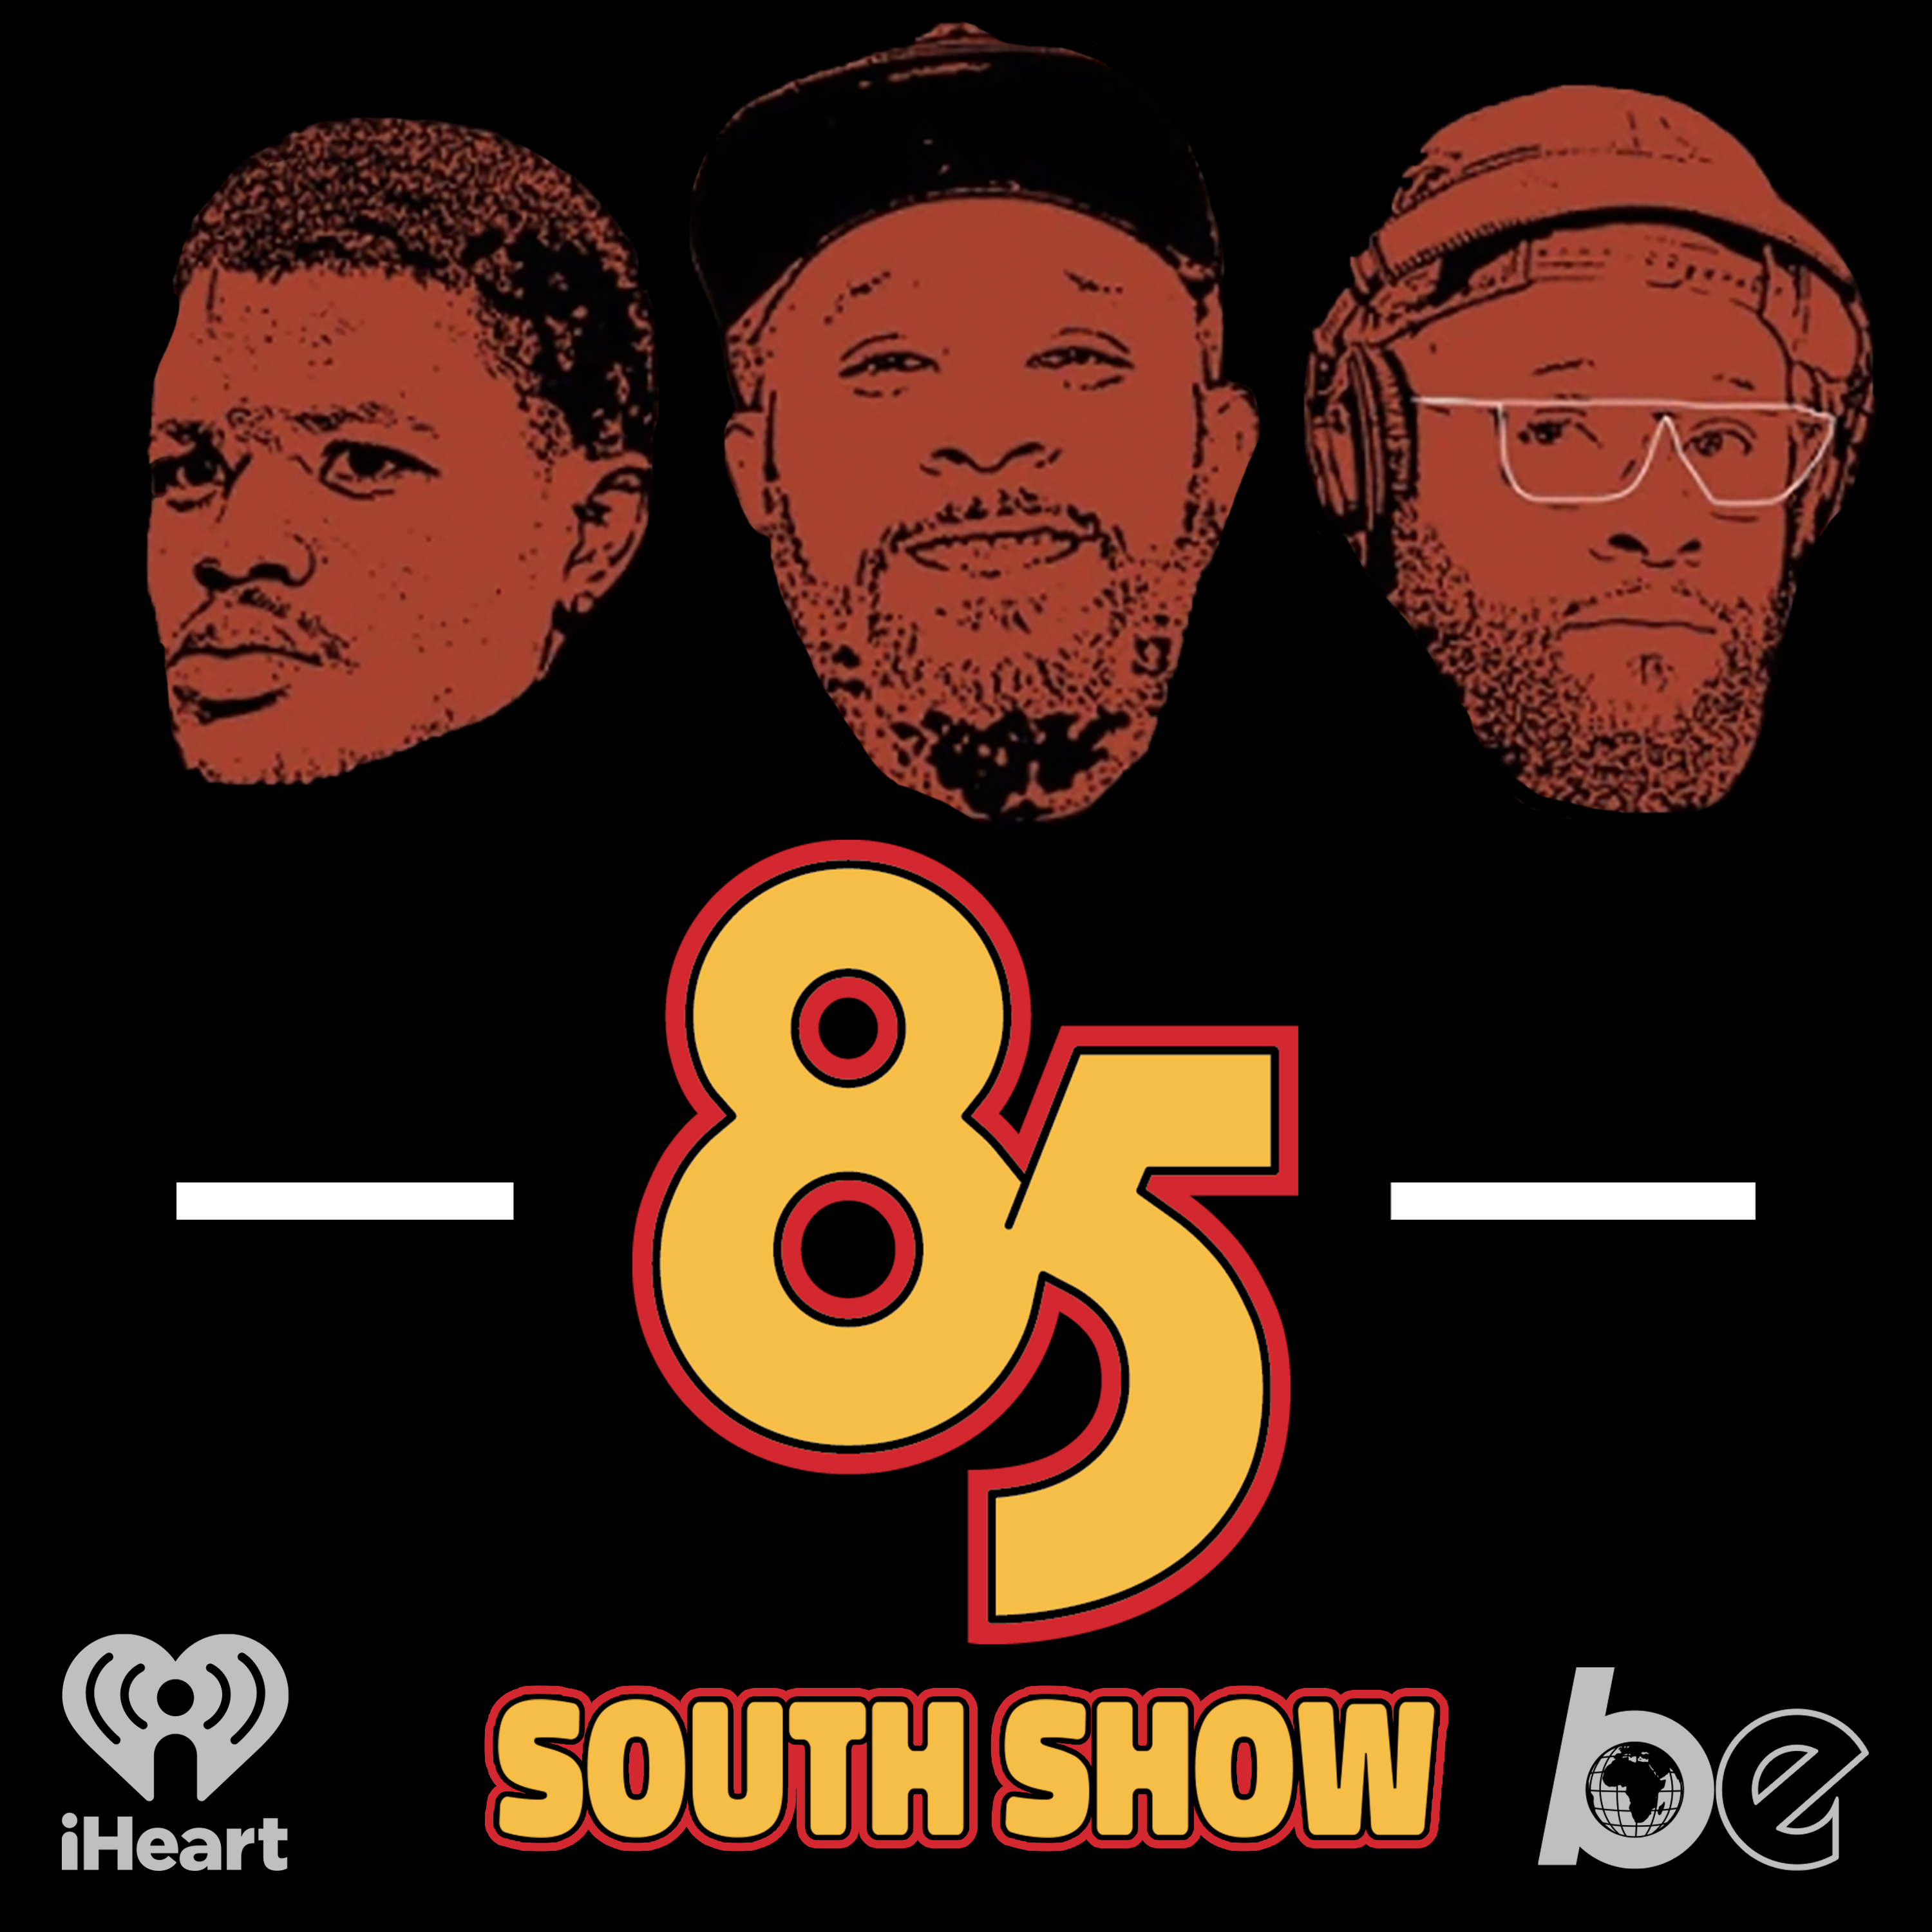 KIRKO BANGZ in the Trap | The 85 South Show